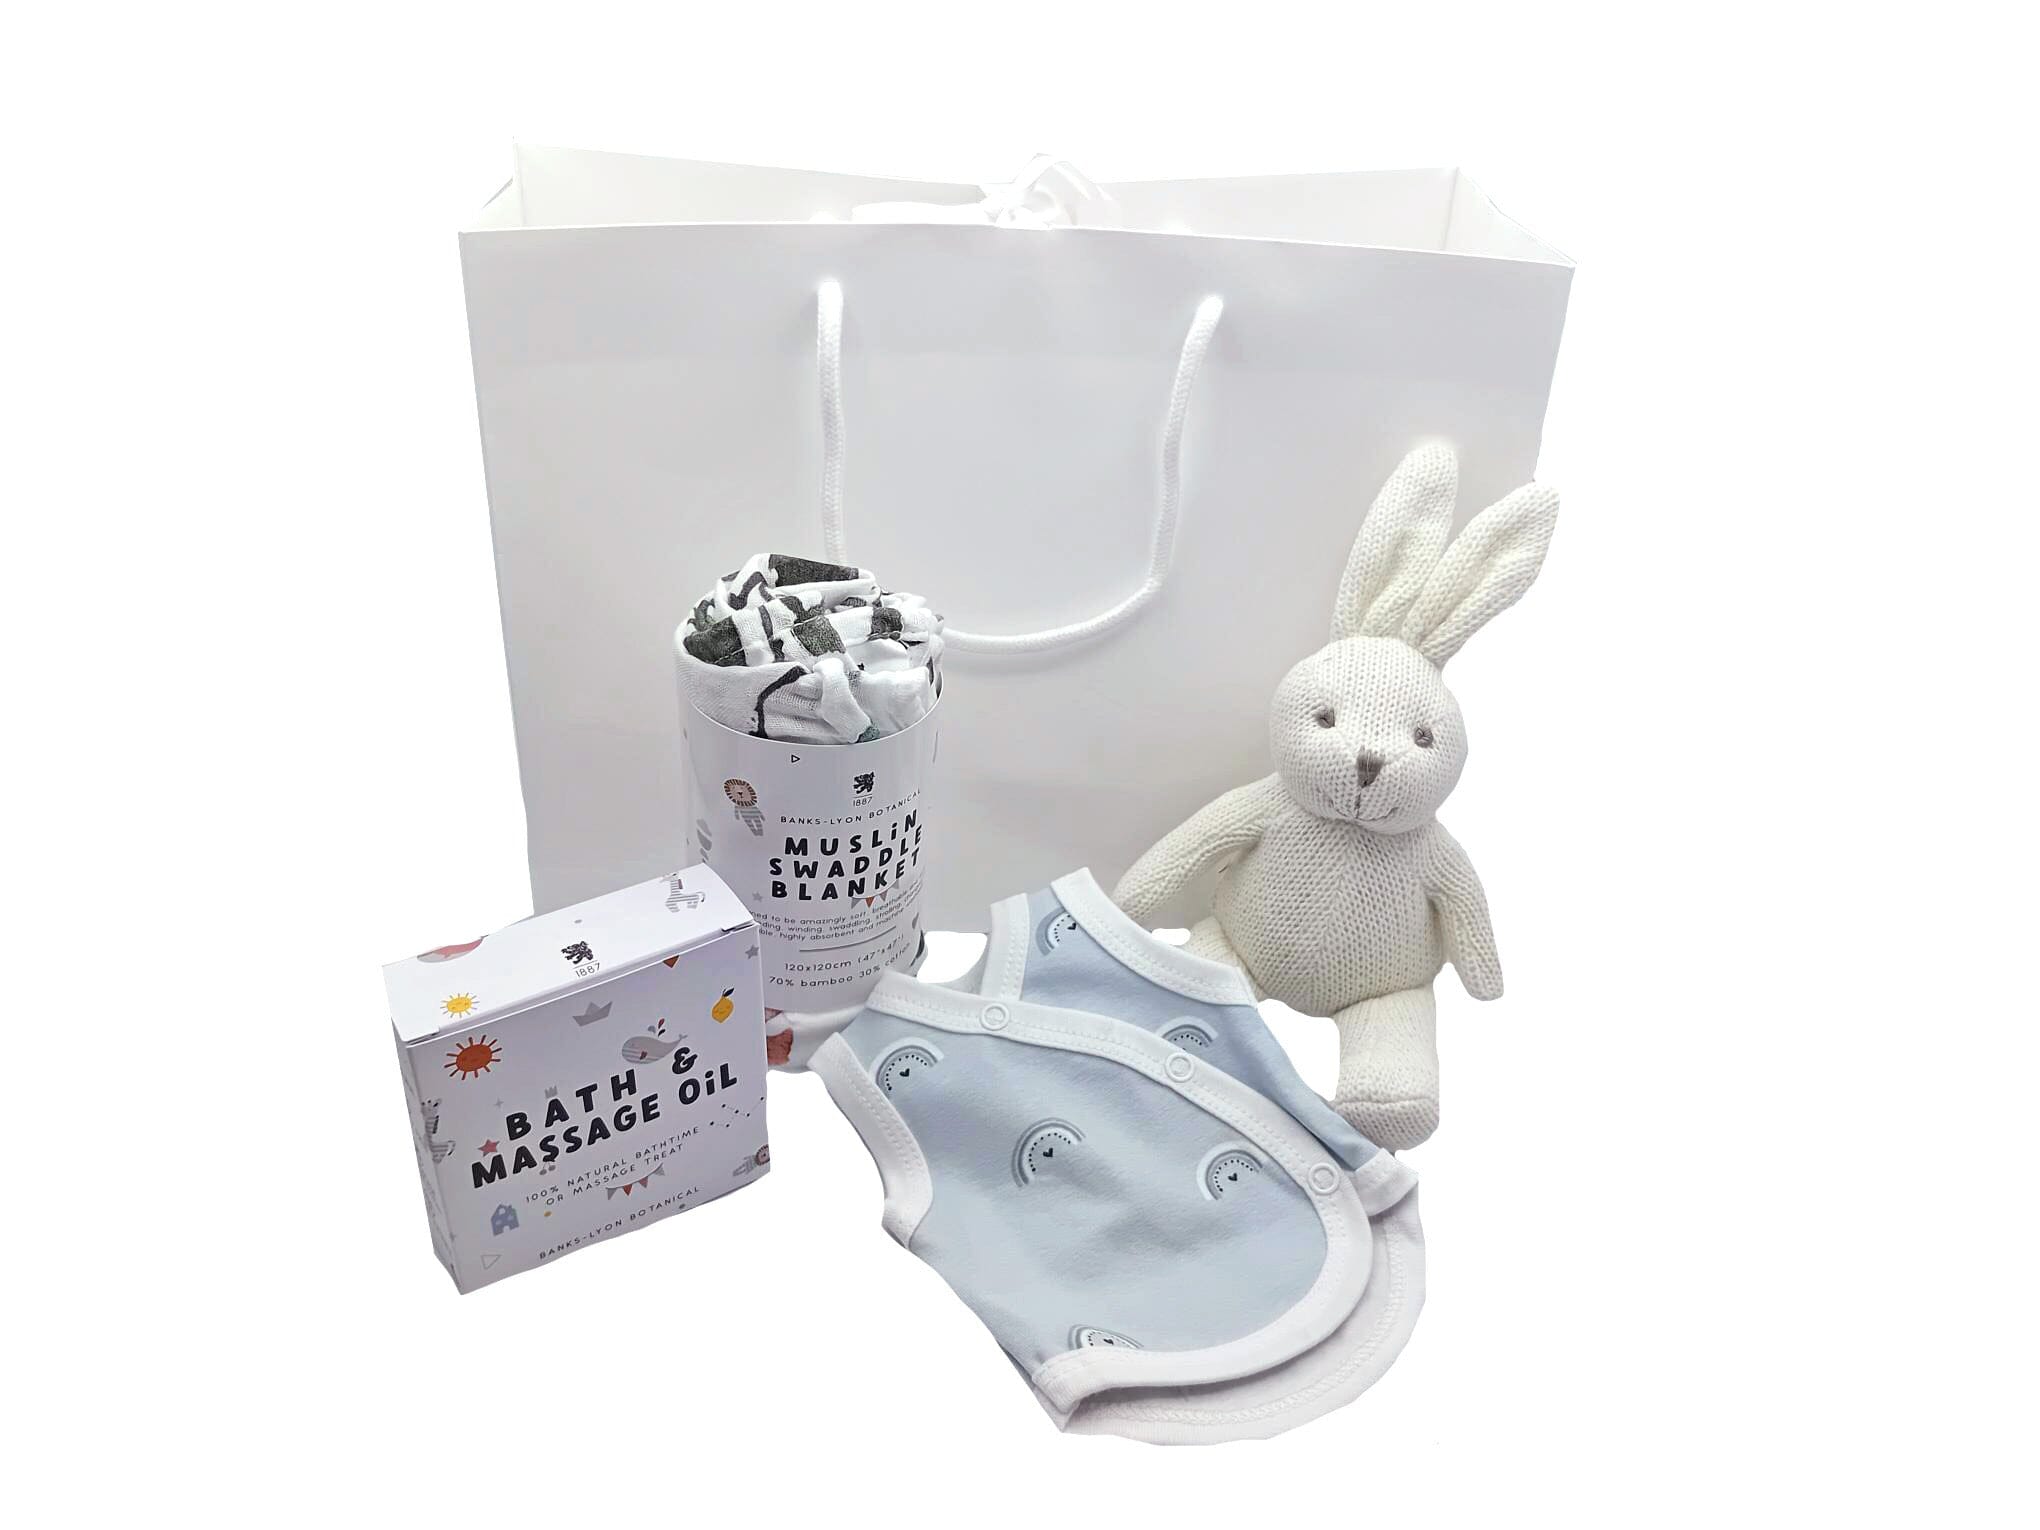 Gift Bag - wrap - Little Mouse Baby Clothing and Gifts Ltd